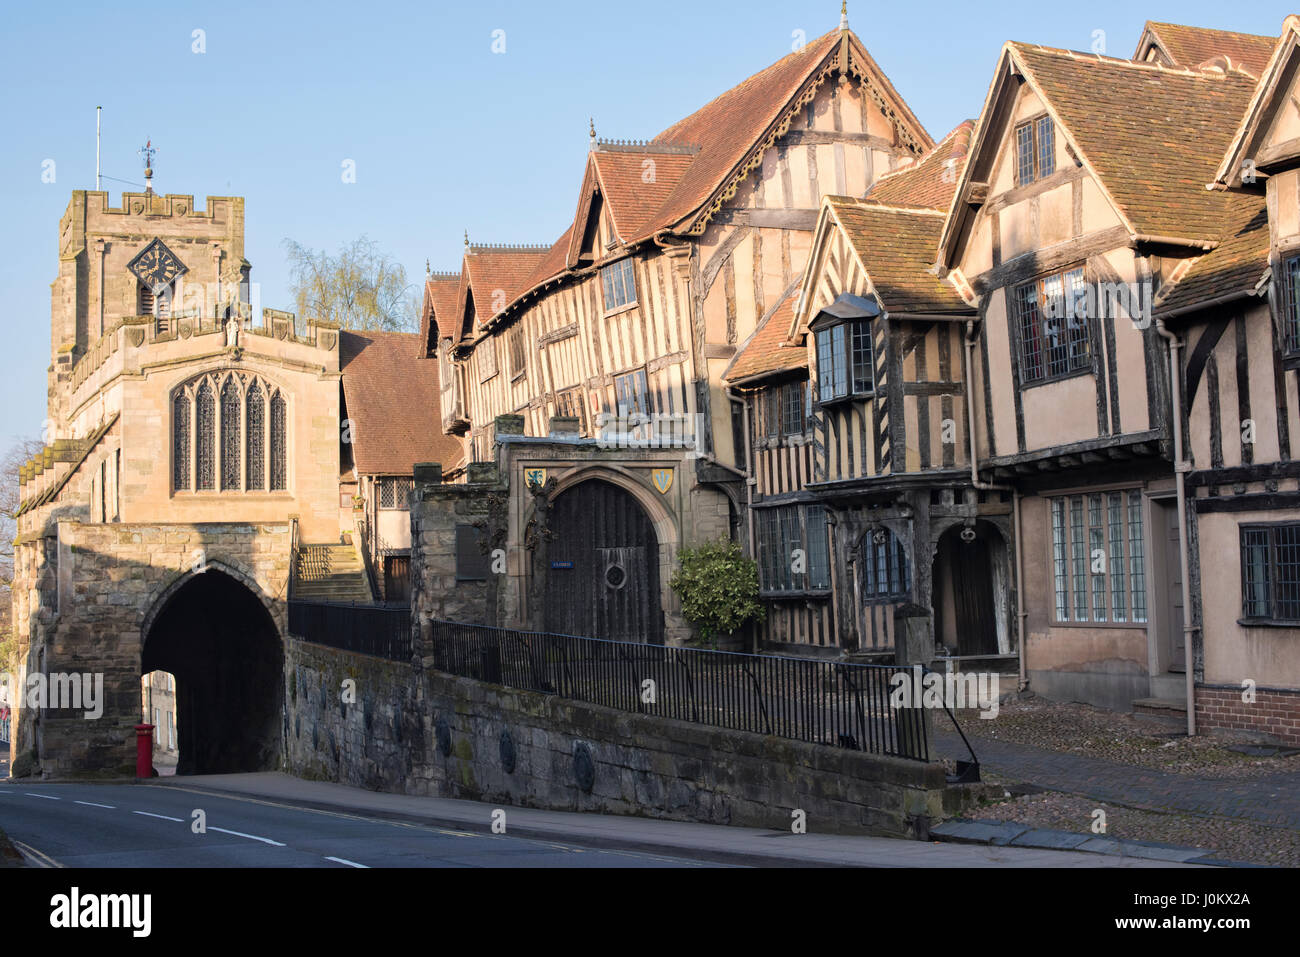 Lord Leycester hospital and St James Chapel West Gate. Historic group of timber-framed buildings on Warwick High Street. Warwick, Warwickshire, UK Stock Photo